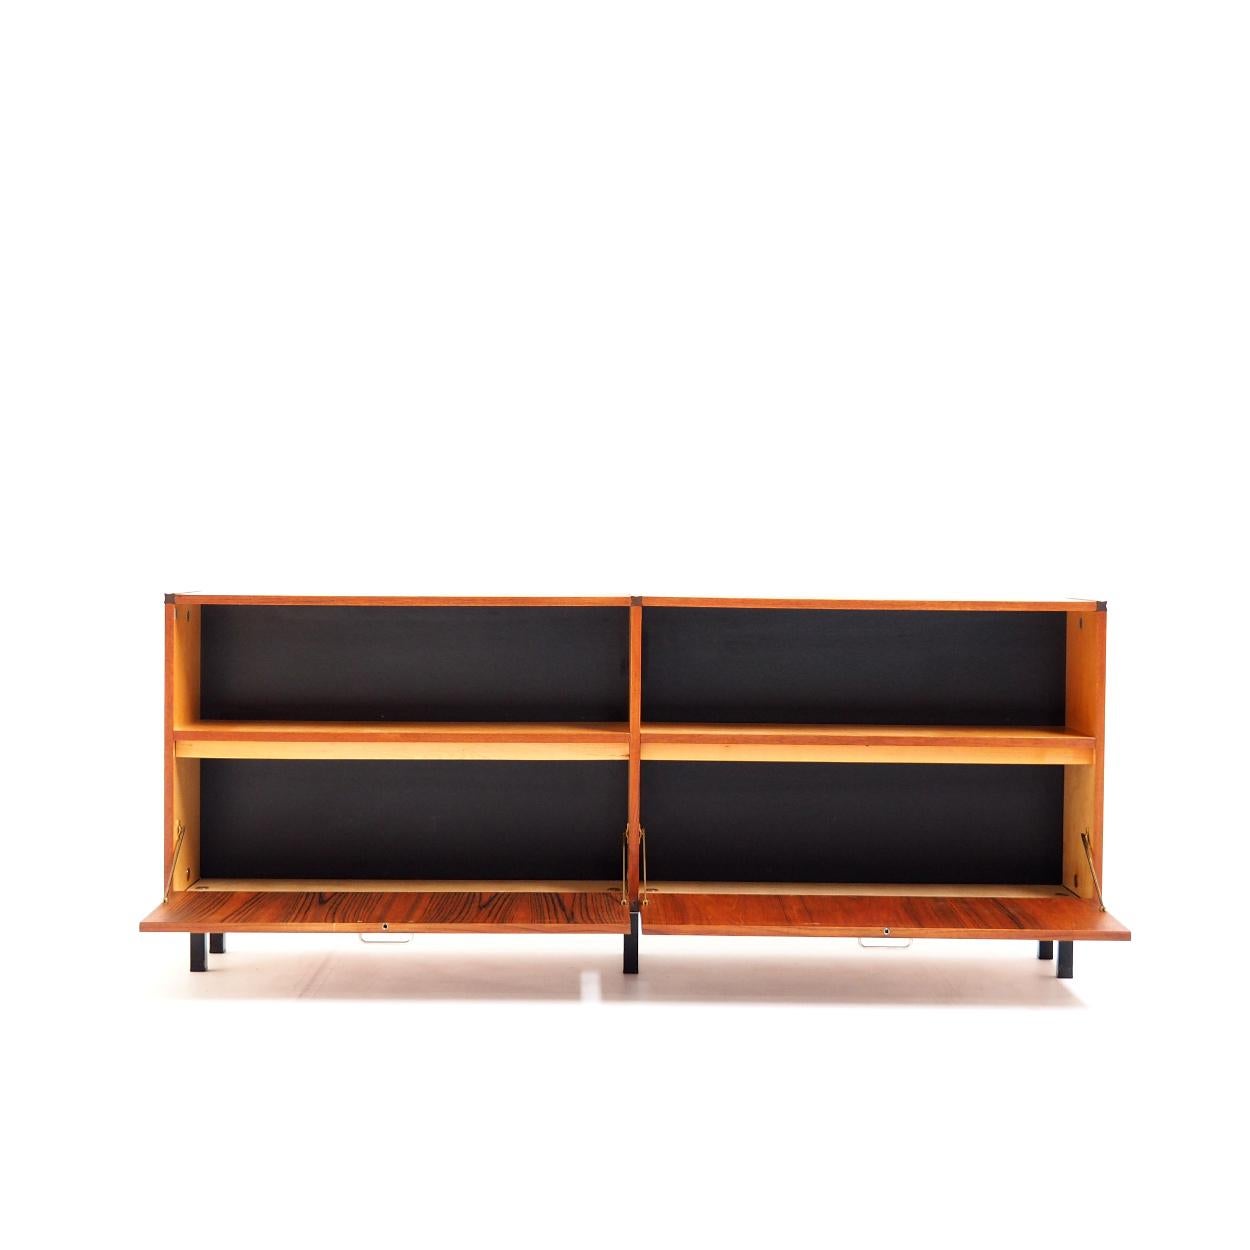 Sideboard in teak designed by Cees Braakman for Pastoe. It comes from the 'Made to Measure' series that was produced in the Netherlands from the early 1950s to the mid-1960s.

The sideboard has a special composition with two fall fronts as doors,